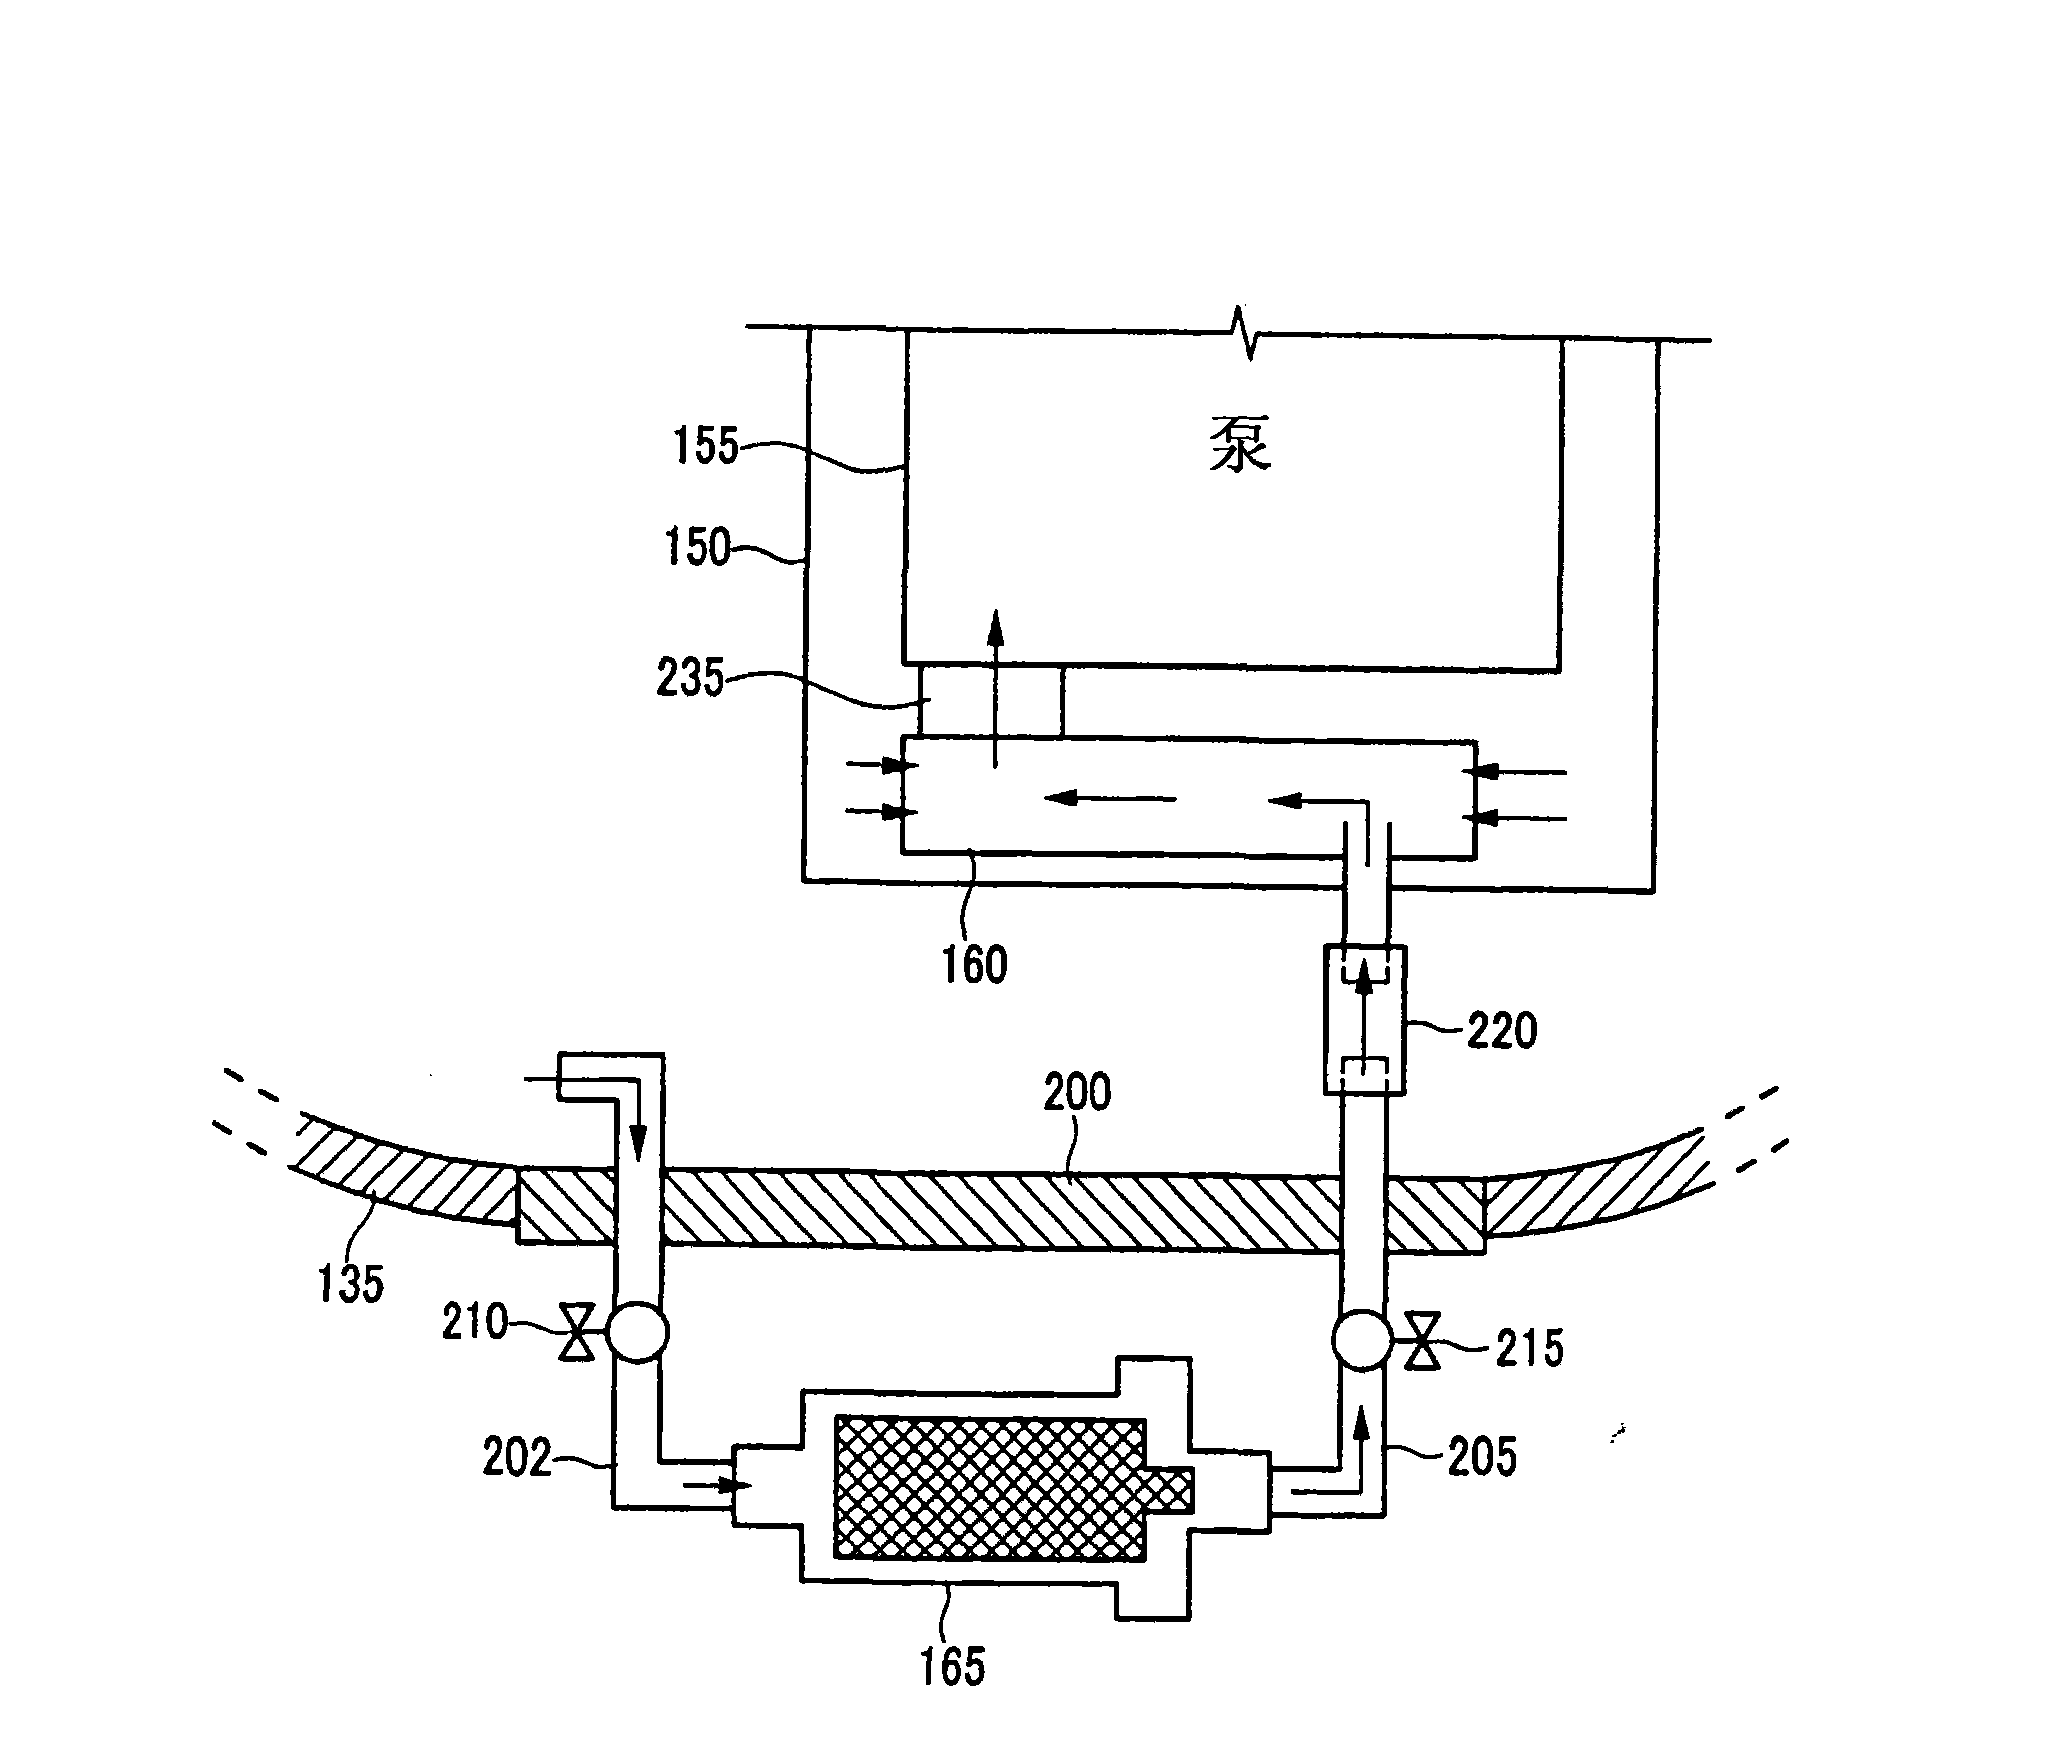 Liquefied petroleum fuel-injection feeding system